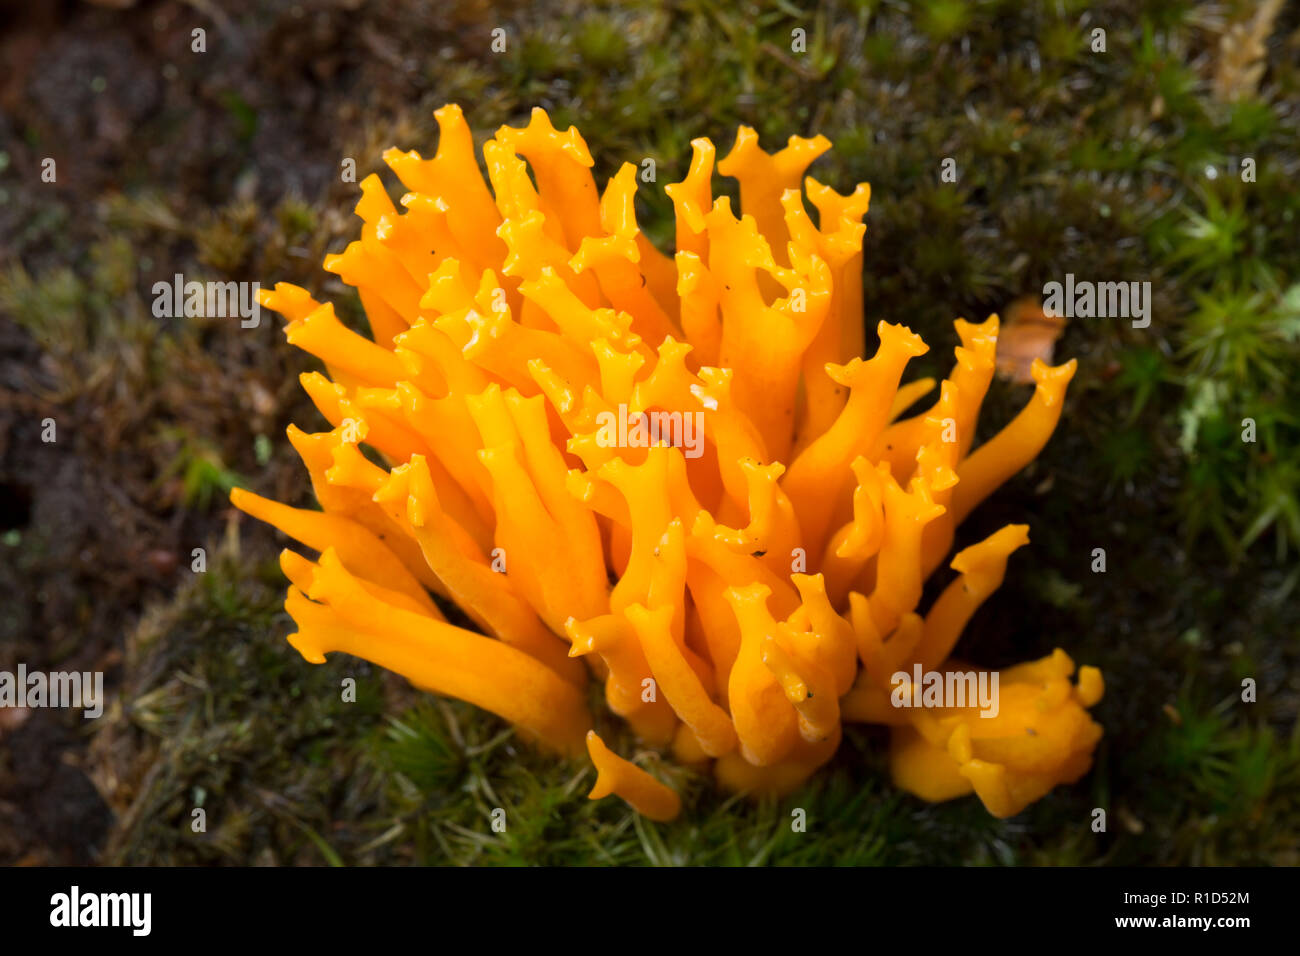 Yellow stagshorn fungi, Calocera viscosa, growing on a rotten tree stump in the New Forest in Hampshire England UK GB Stock Photo